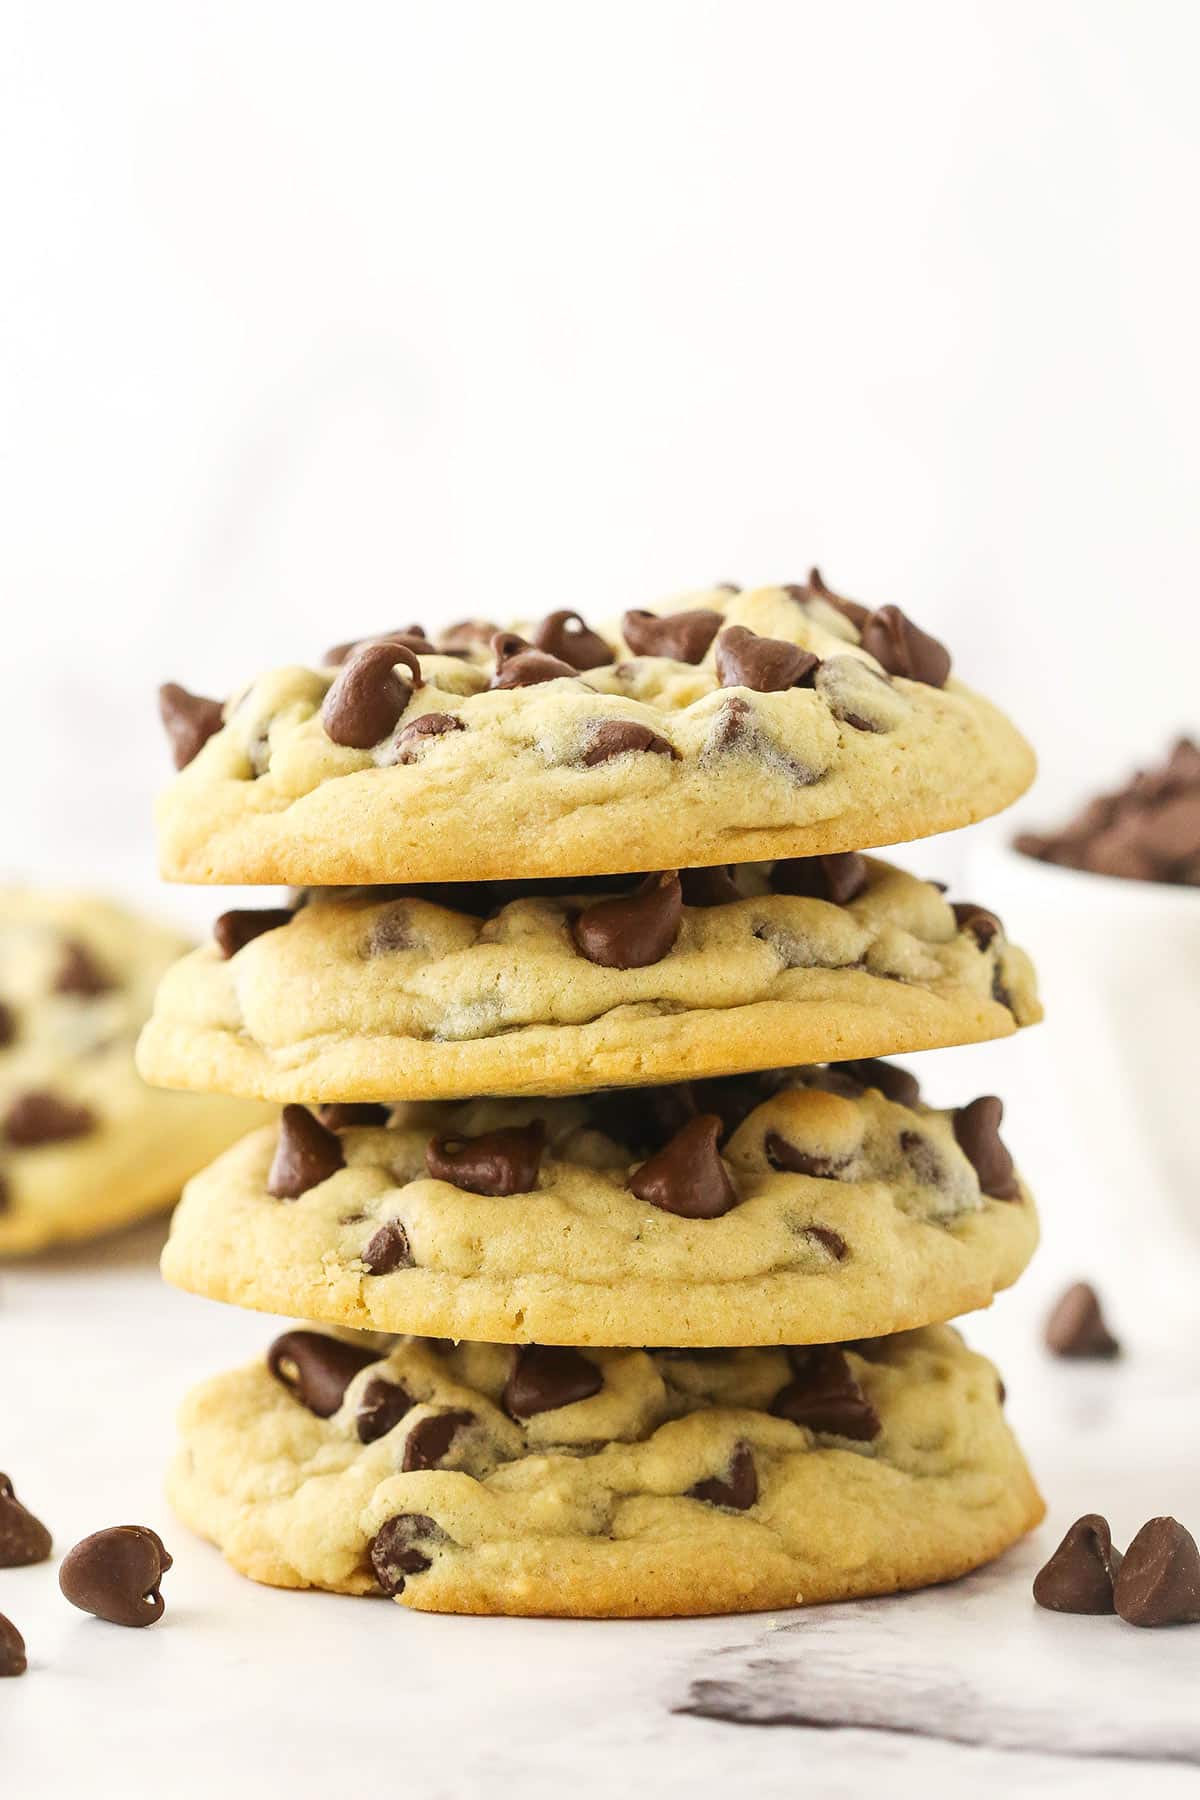 Four cooled chocolate chip cookies stacked on top of one another.